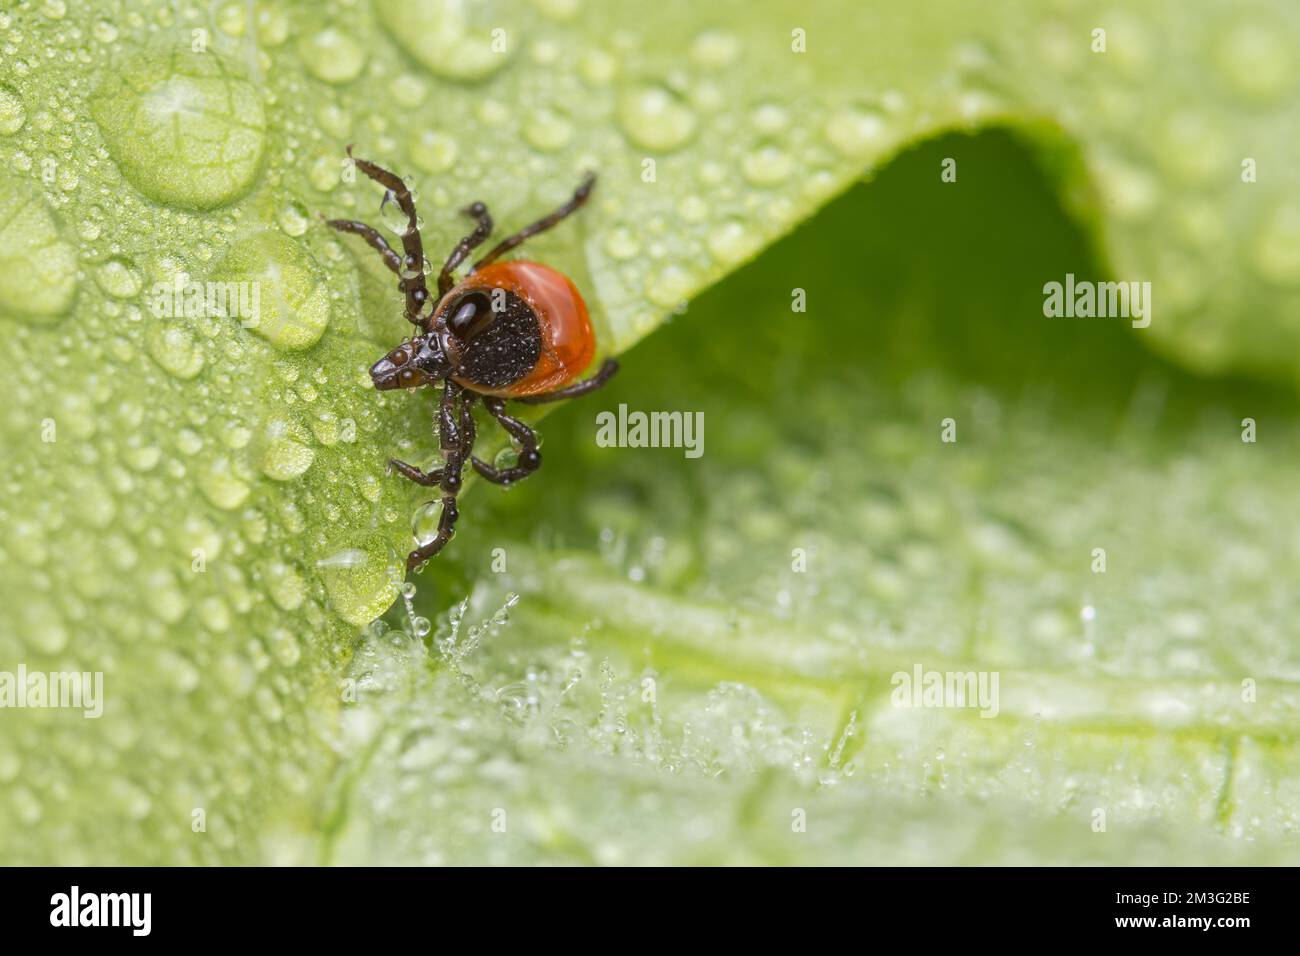 Dangerous female deer tick crawling in dew drops of wet leaf. Ixodes ricinus or scapularis. Closeup of parasitic mite on nature green rainy background. Stock Photo